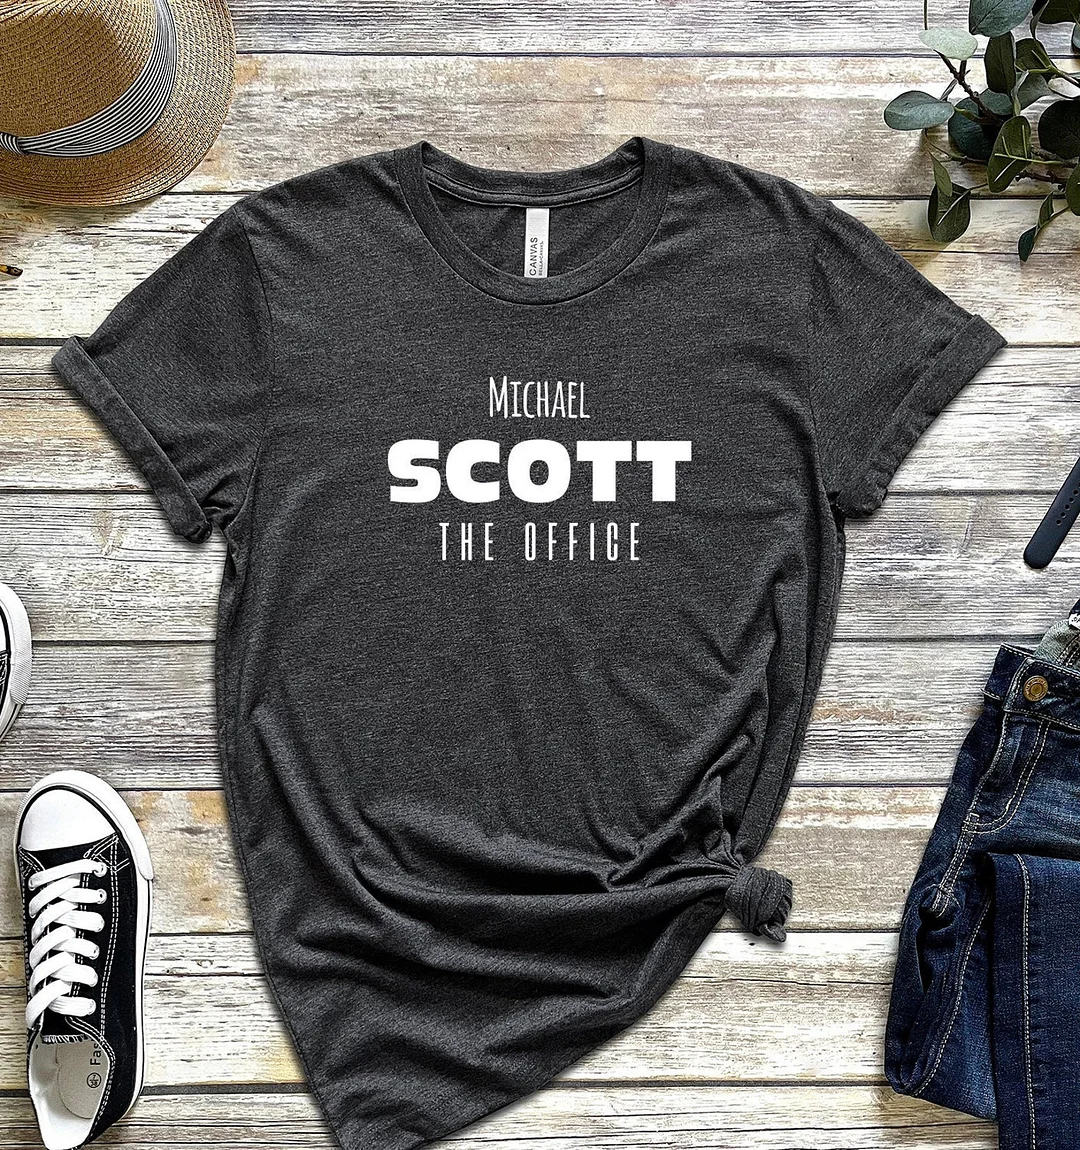 Women And Man Michael Scott Shirt The Office Lover Funny Saying Unisex T-Shirt Top Tees